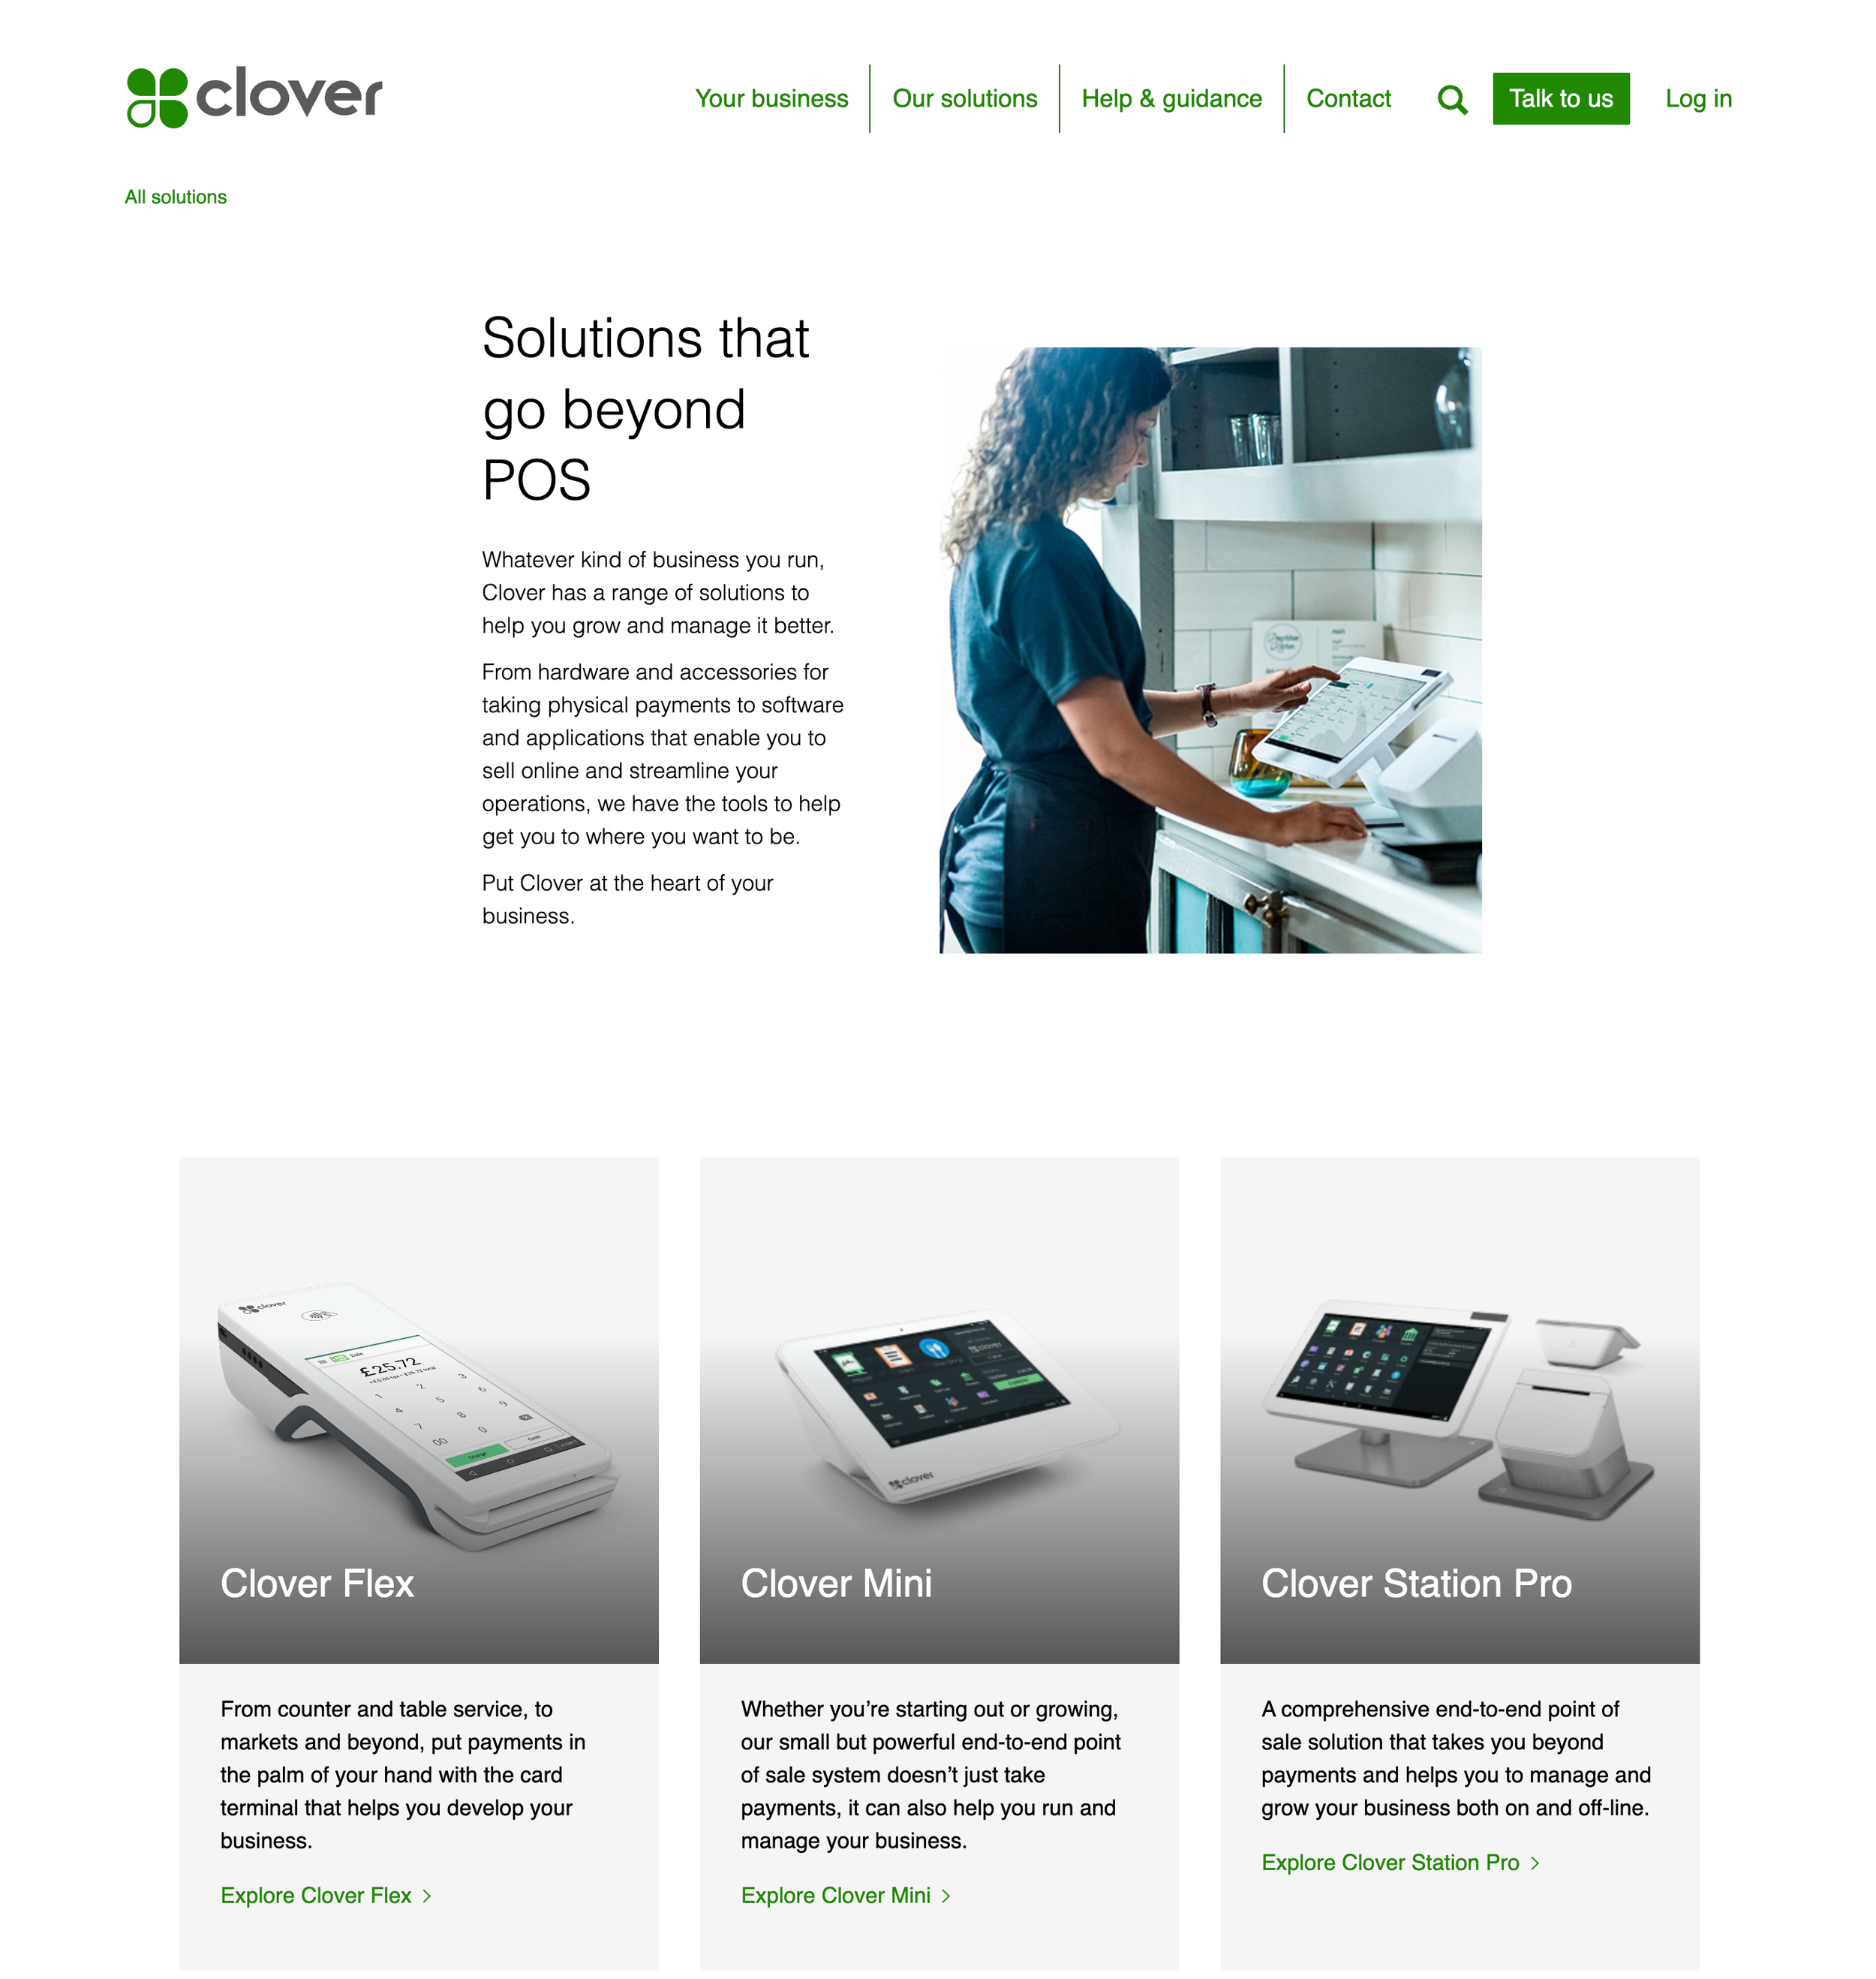 Clover solutions